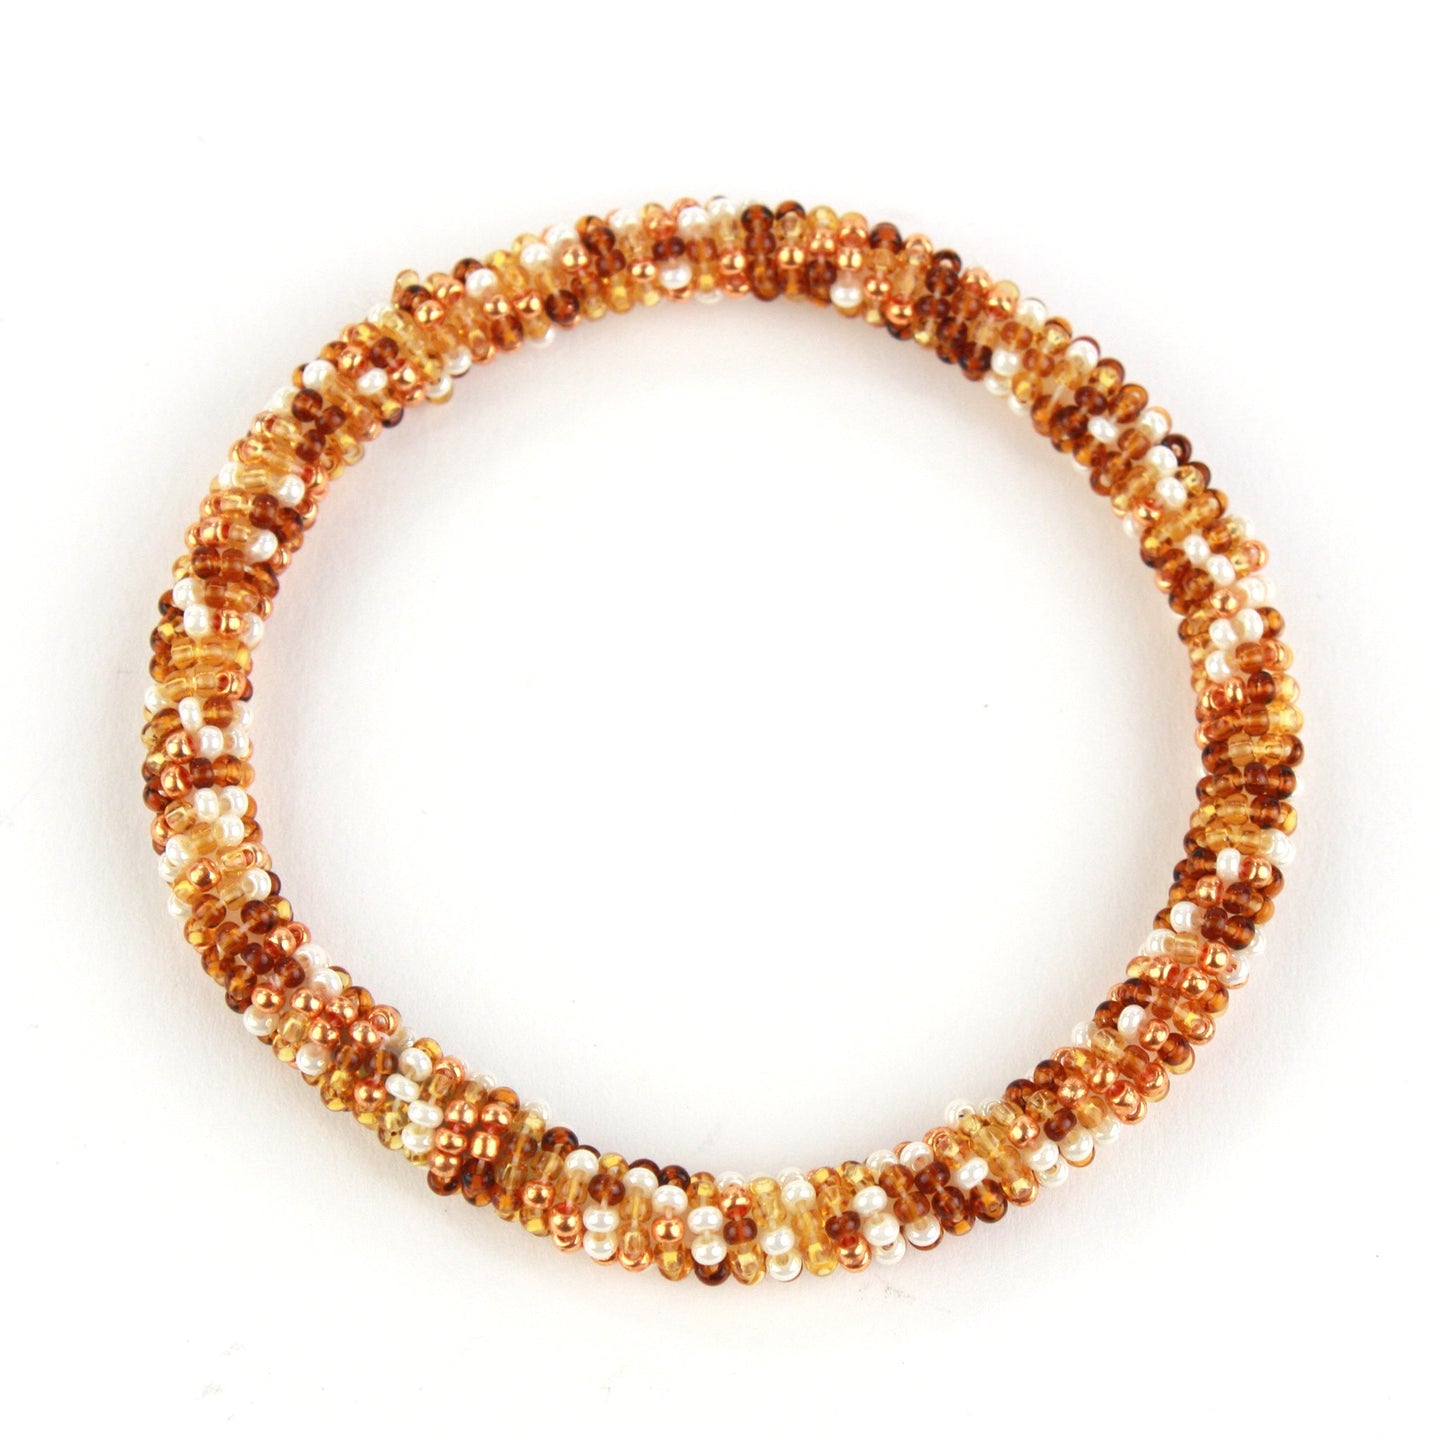 Happy bangle -amber, ivory and gold